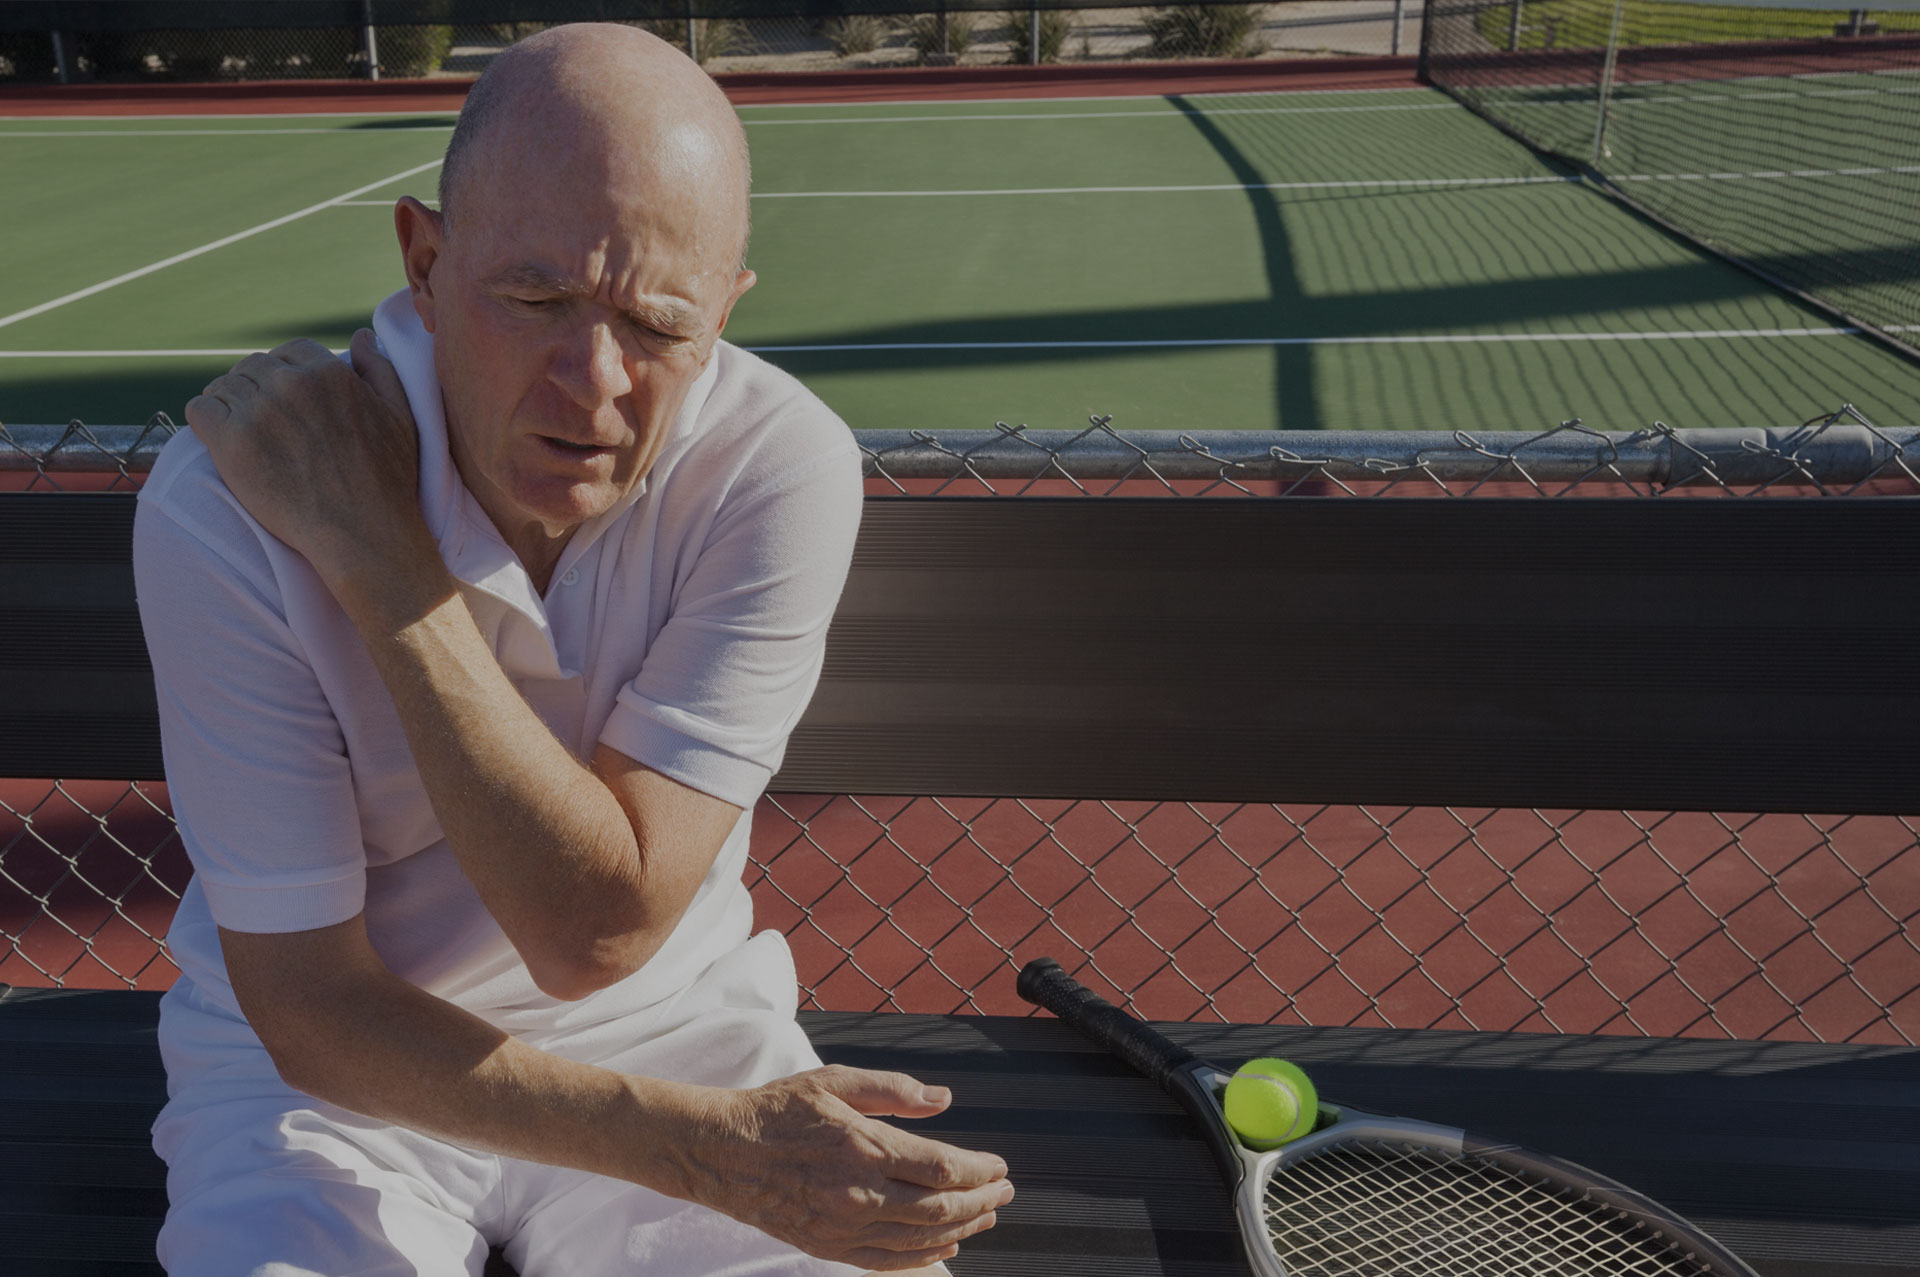 Future Search Trials Fibromyalgia Study FSTrials Man sitting in pain holding arm joint pain at tennis court